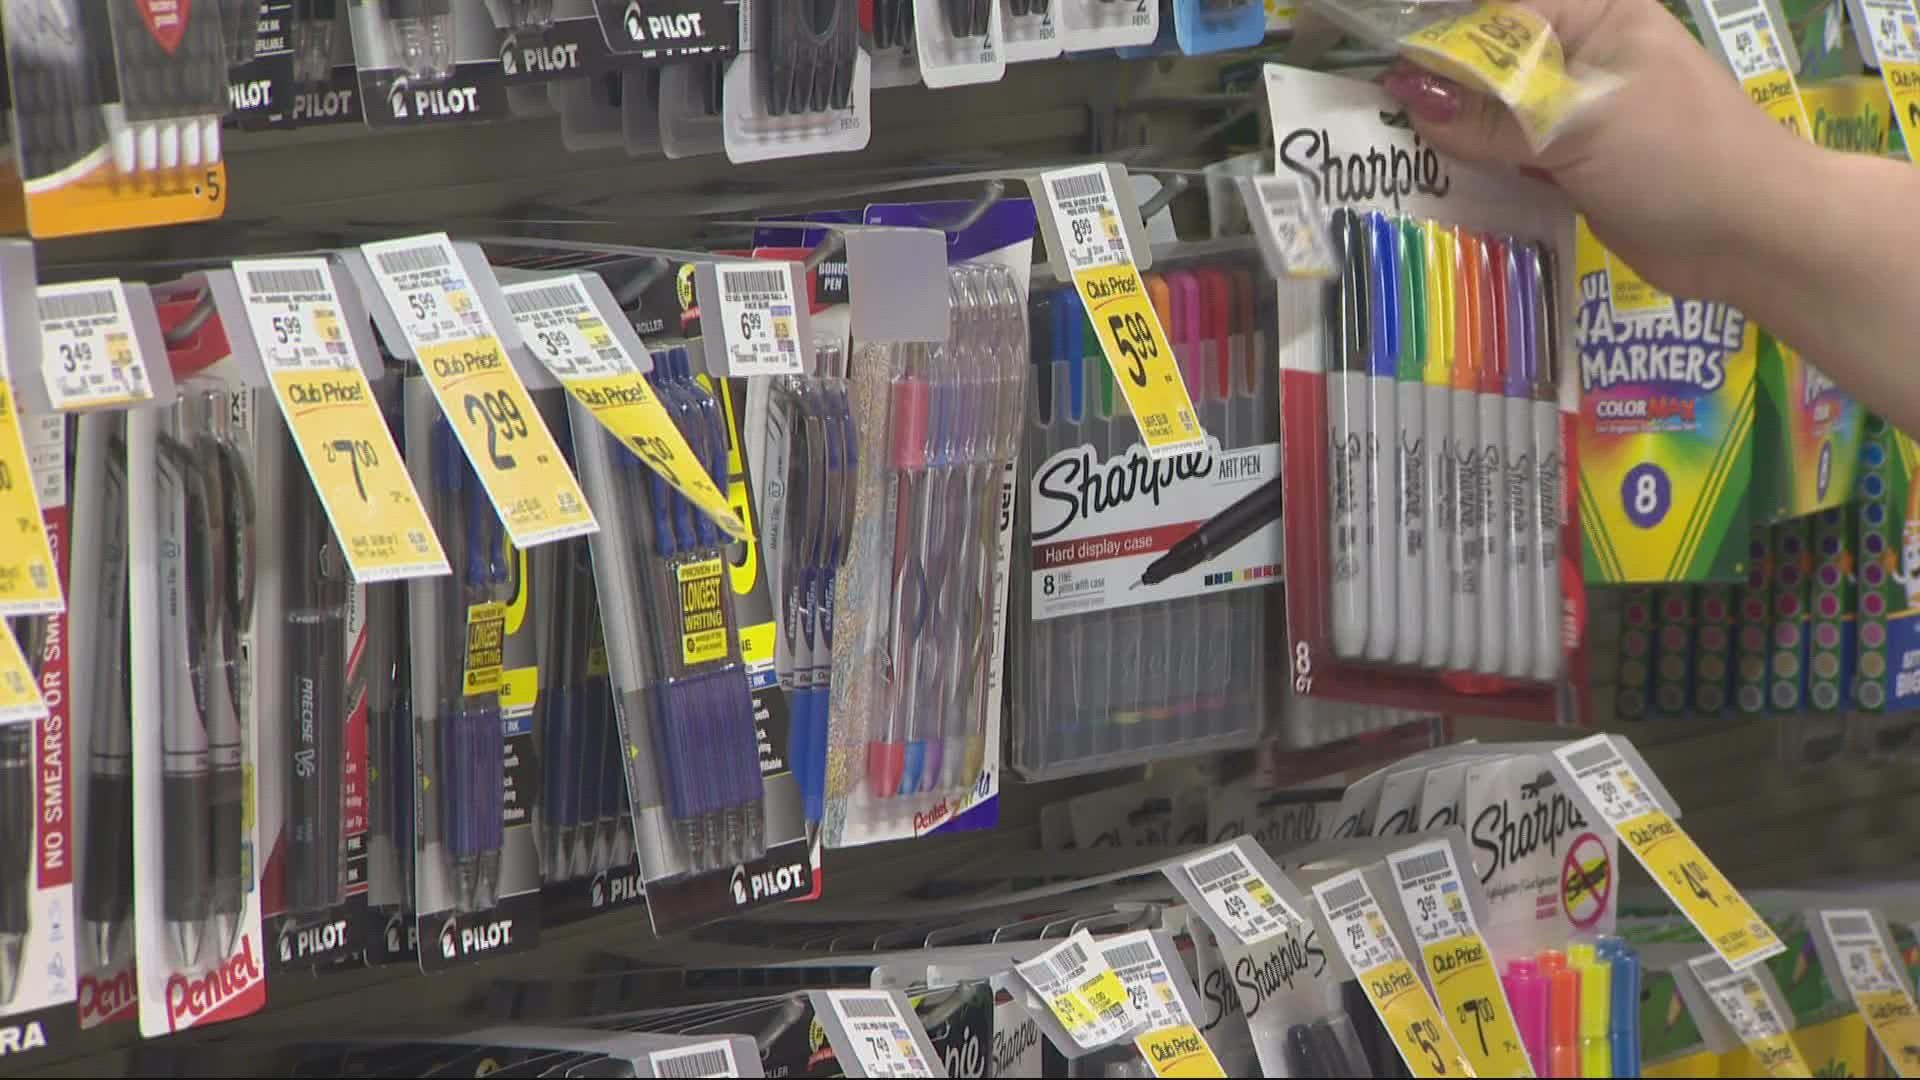 Parents are expected to spend more on school supplies this year compared to last. But there's an easy way to help those in need.